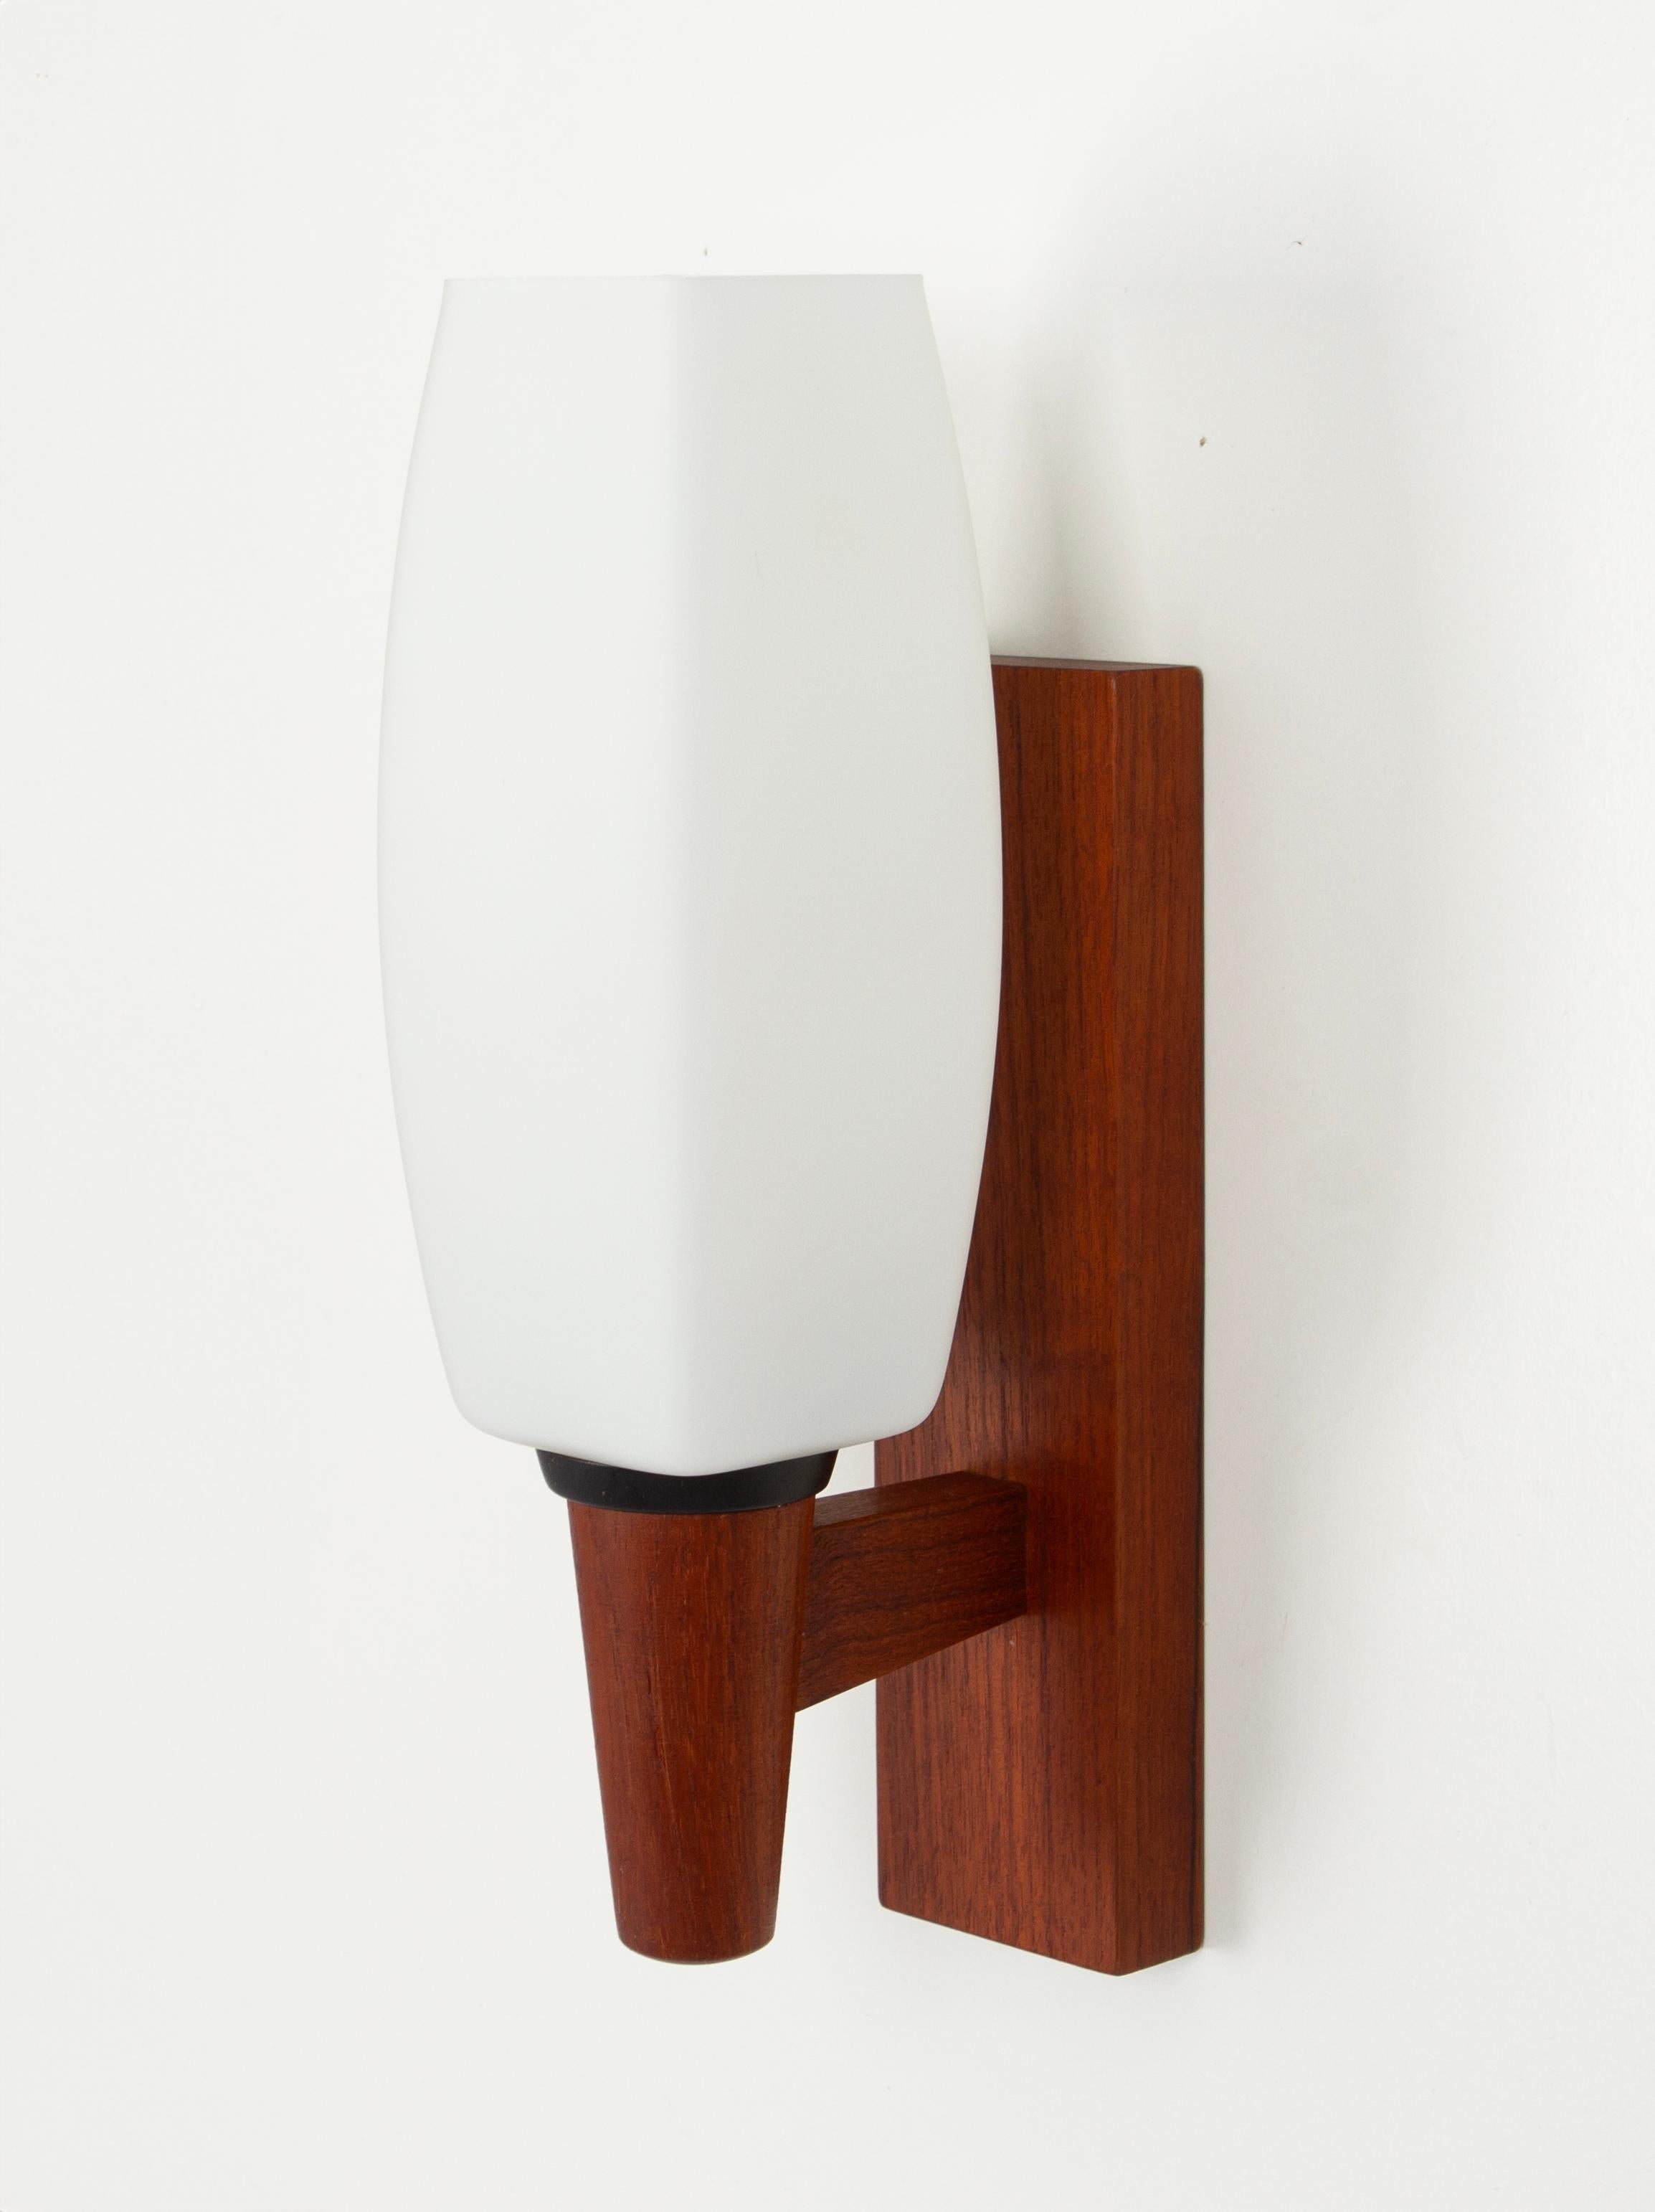 Pair of teak wall lights with opal Glasses by Kaiser Leuchten, Germany, 1960s.
Modern wall lamp in solid teak with opal glasses gives off a very cozy and diffused light.
The light sculpture impresses with clear lines and perfect craftsmanship of the